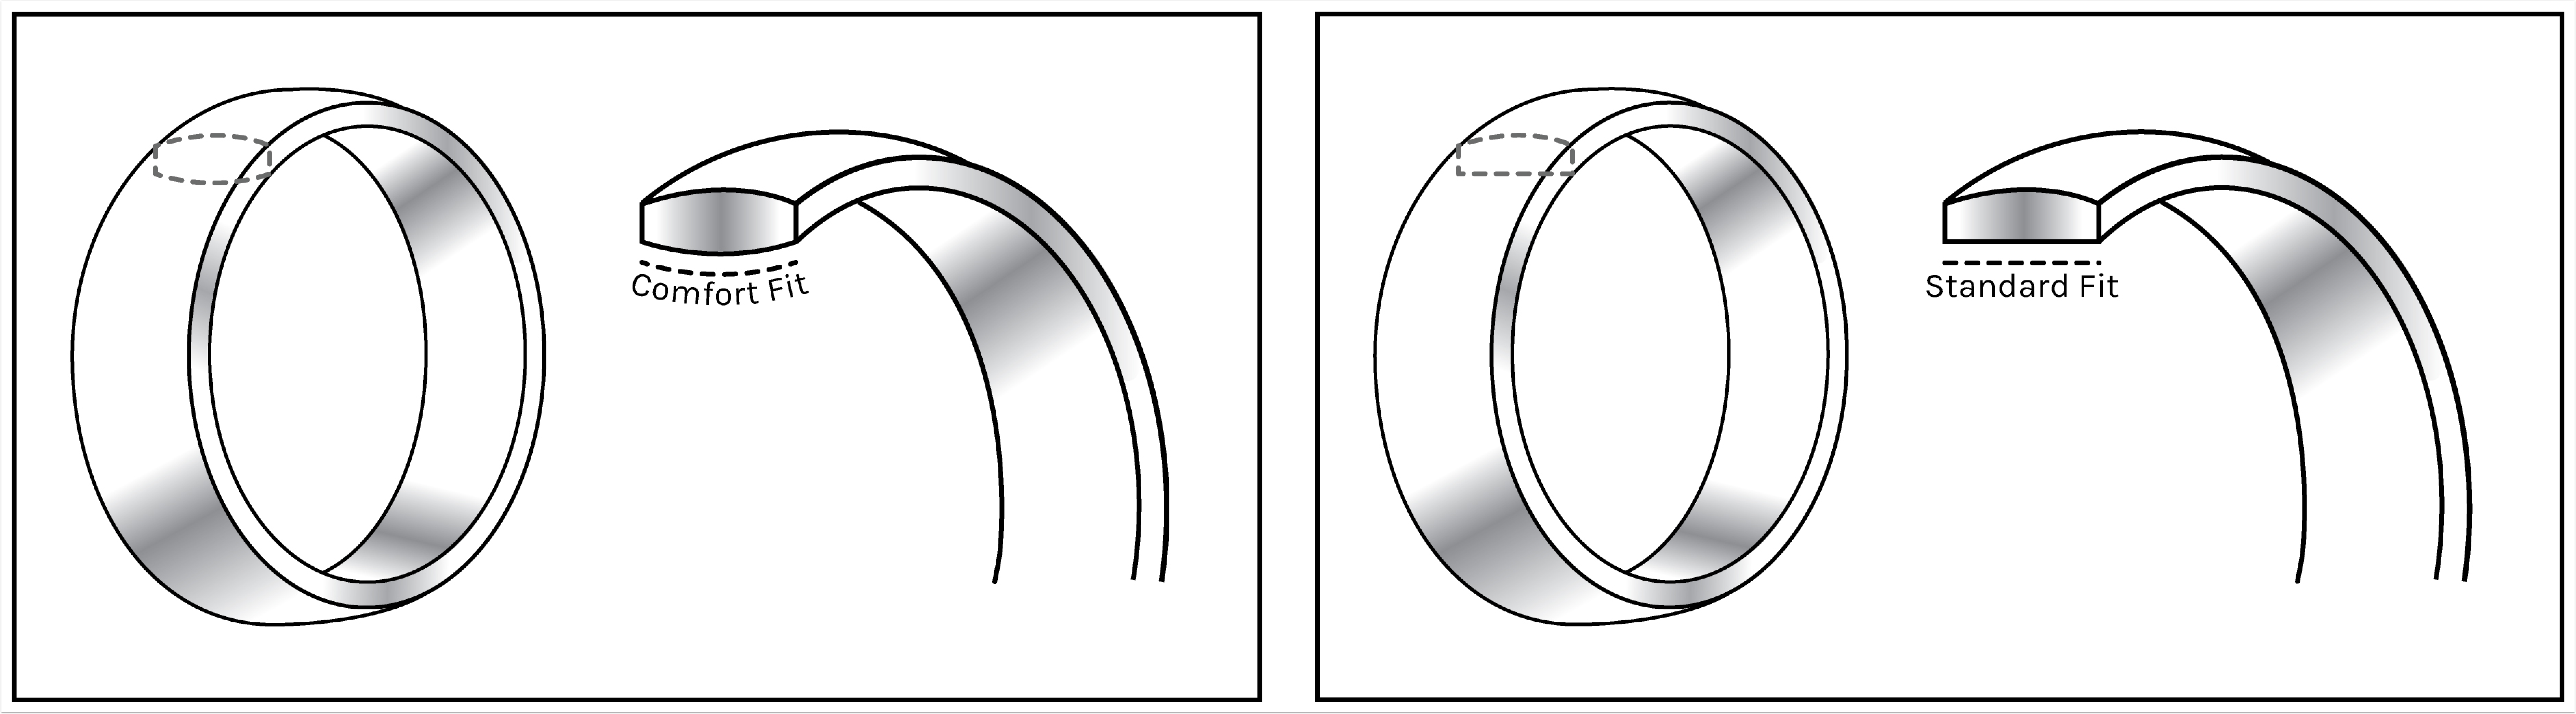 comfort fit ring vs standard fit ring